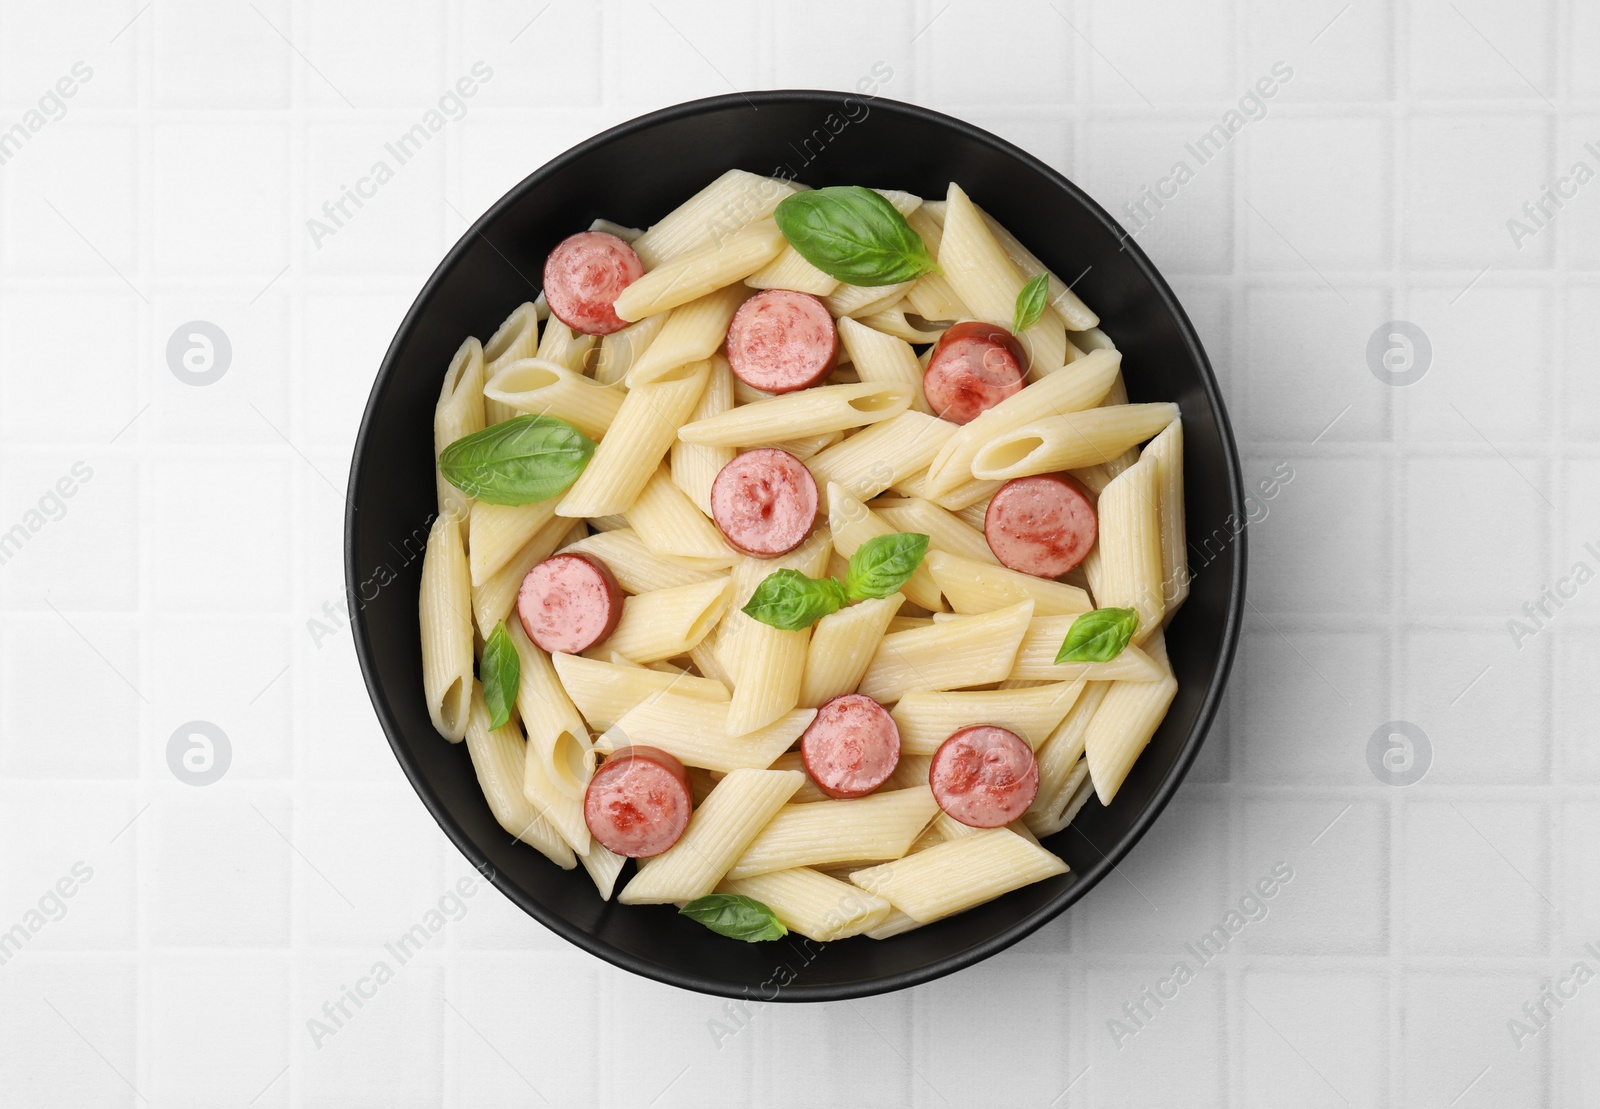 Photo of Tasty pasta with smoked sausage and basil in bowl on white tiled table, top view